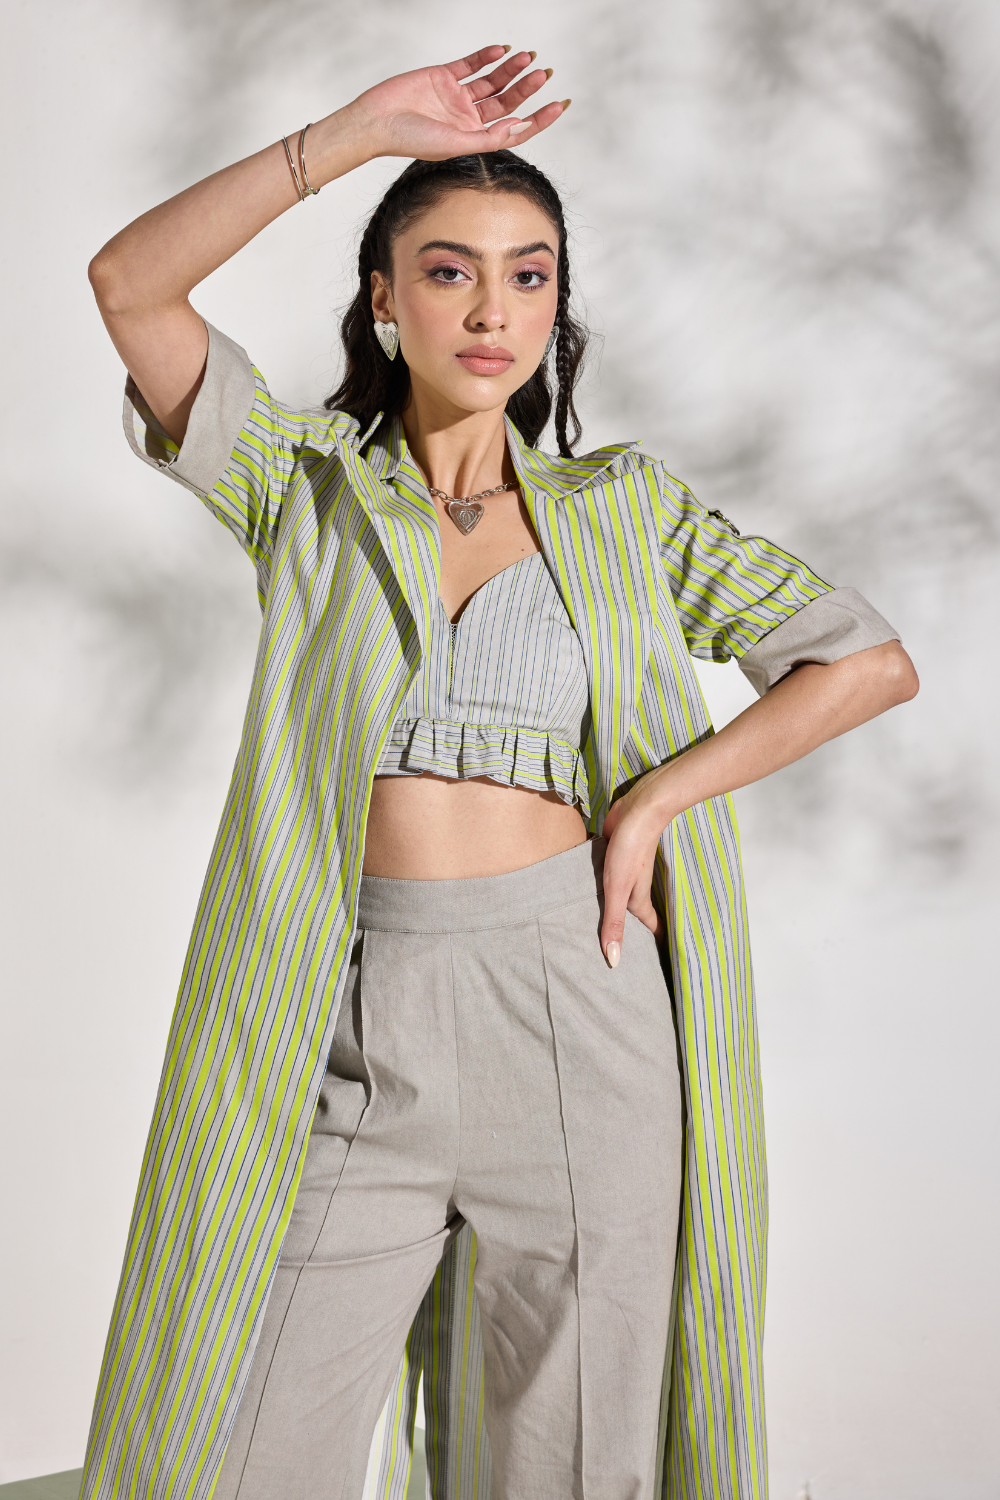 Lime Green Trench Set, a product by Saltz n sand 